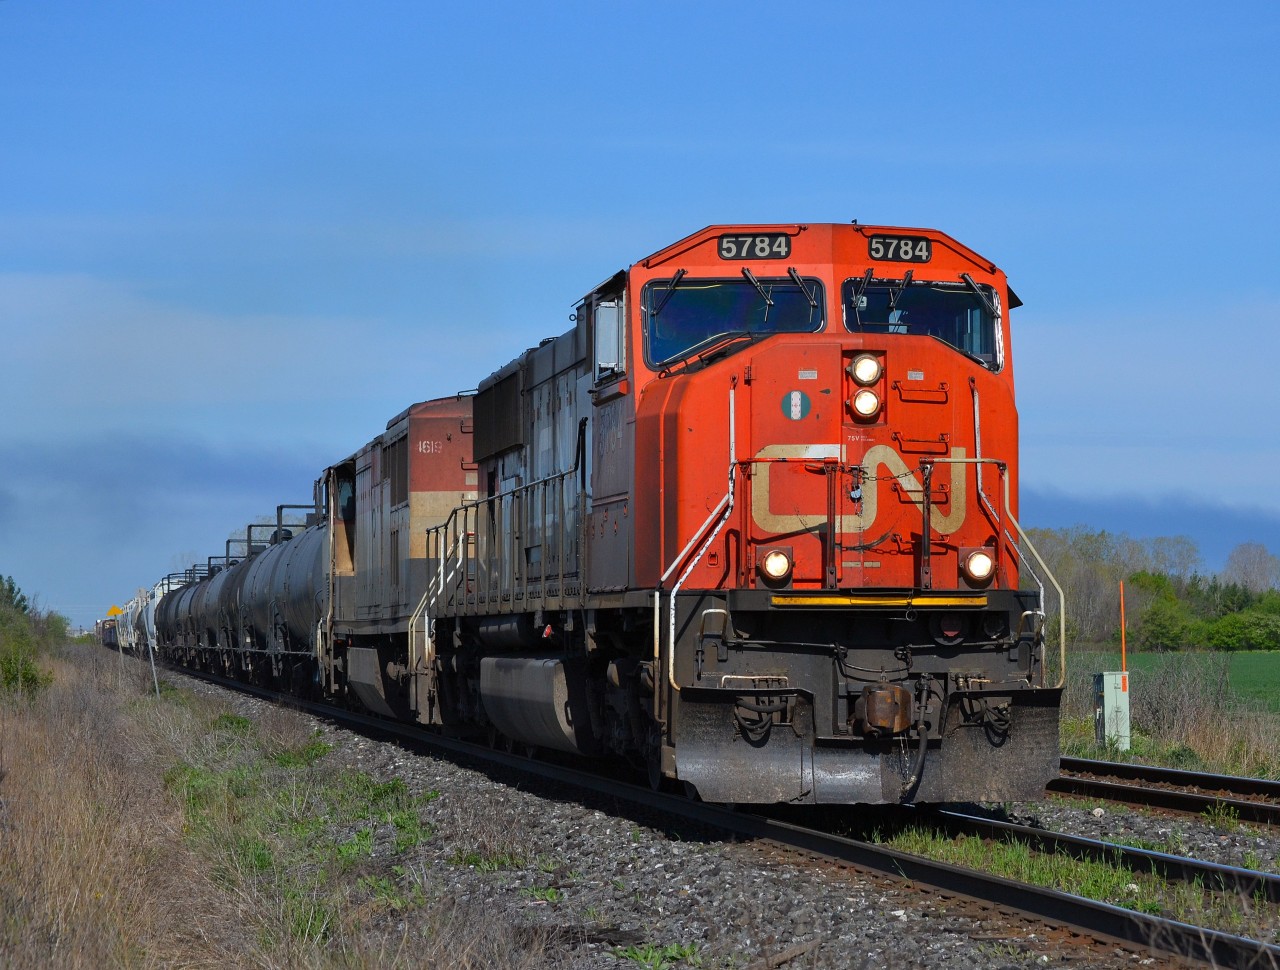 CN 509 departs Sarnia and heads for London led by CN 5784 and BCOL 4619